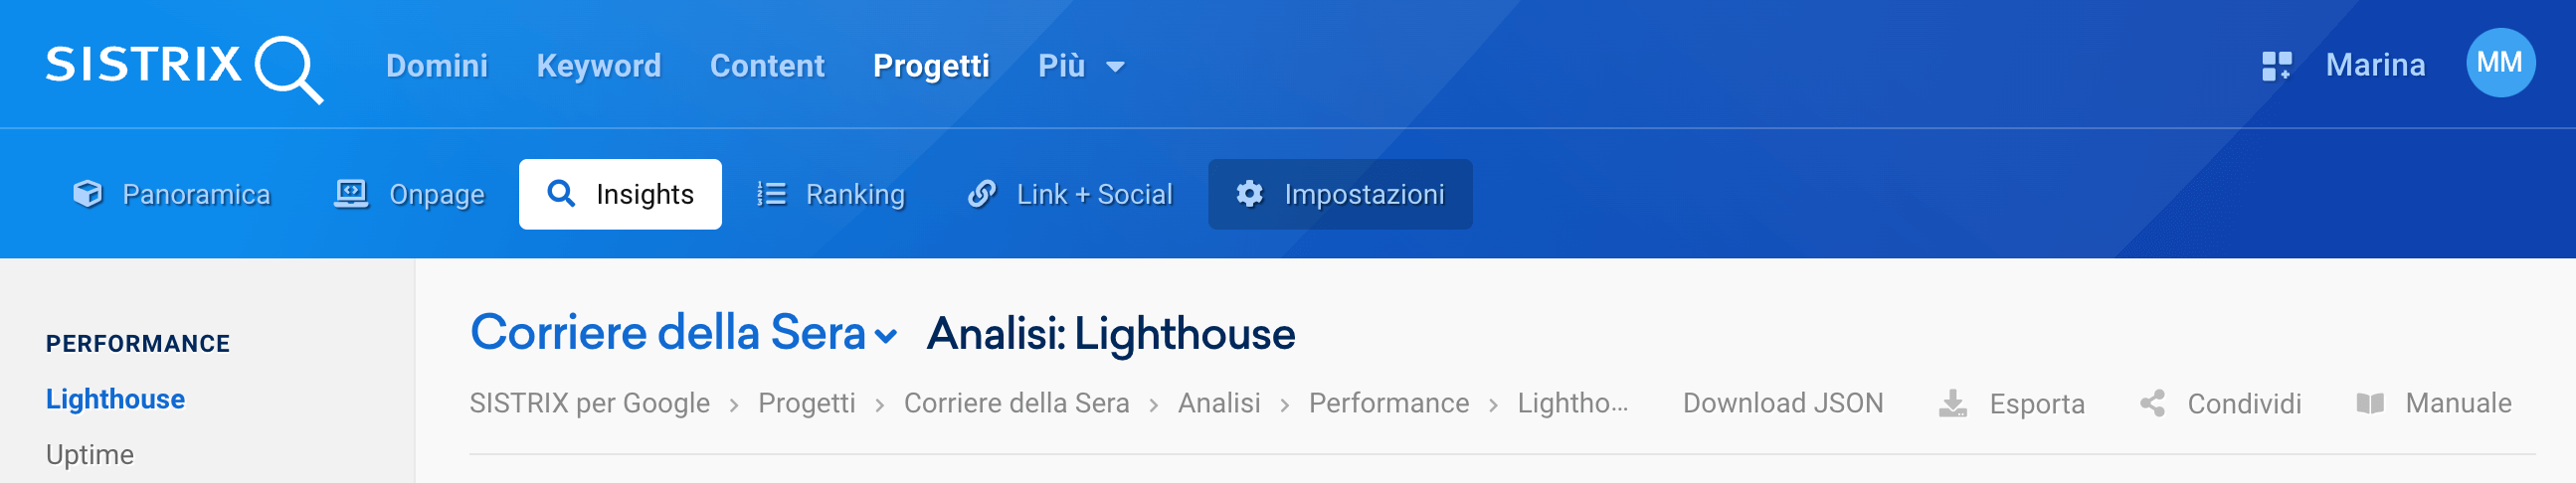 Analisi Lighthouse sito corriere.it - Download file JSON